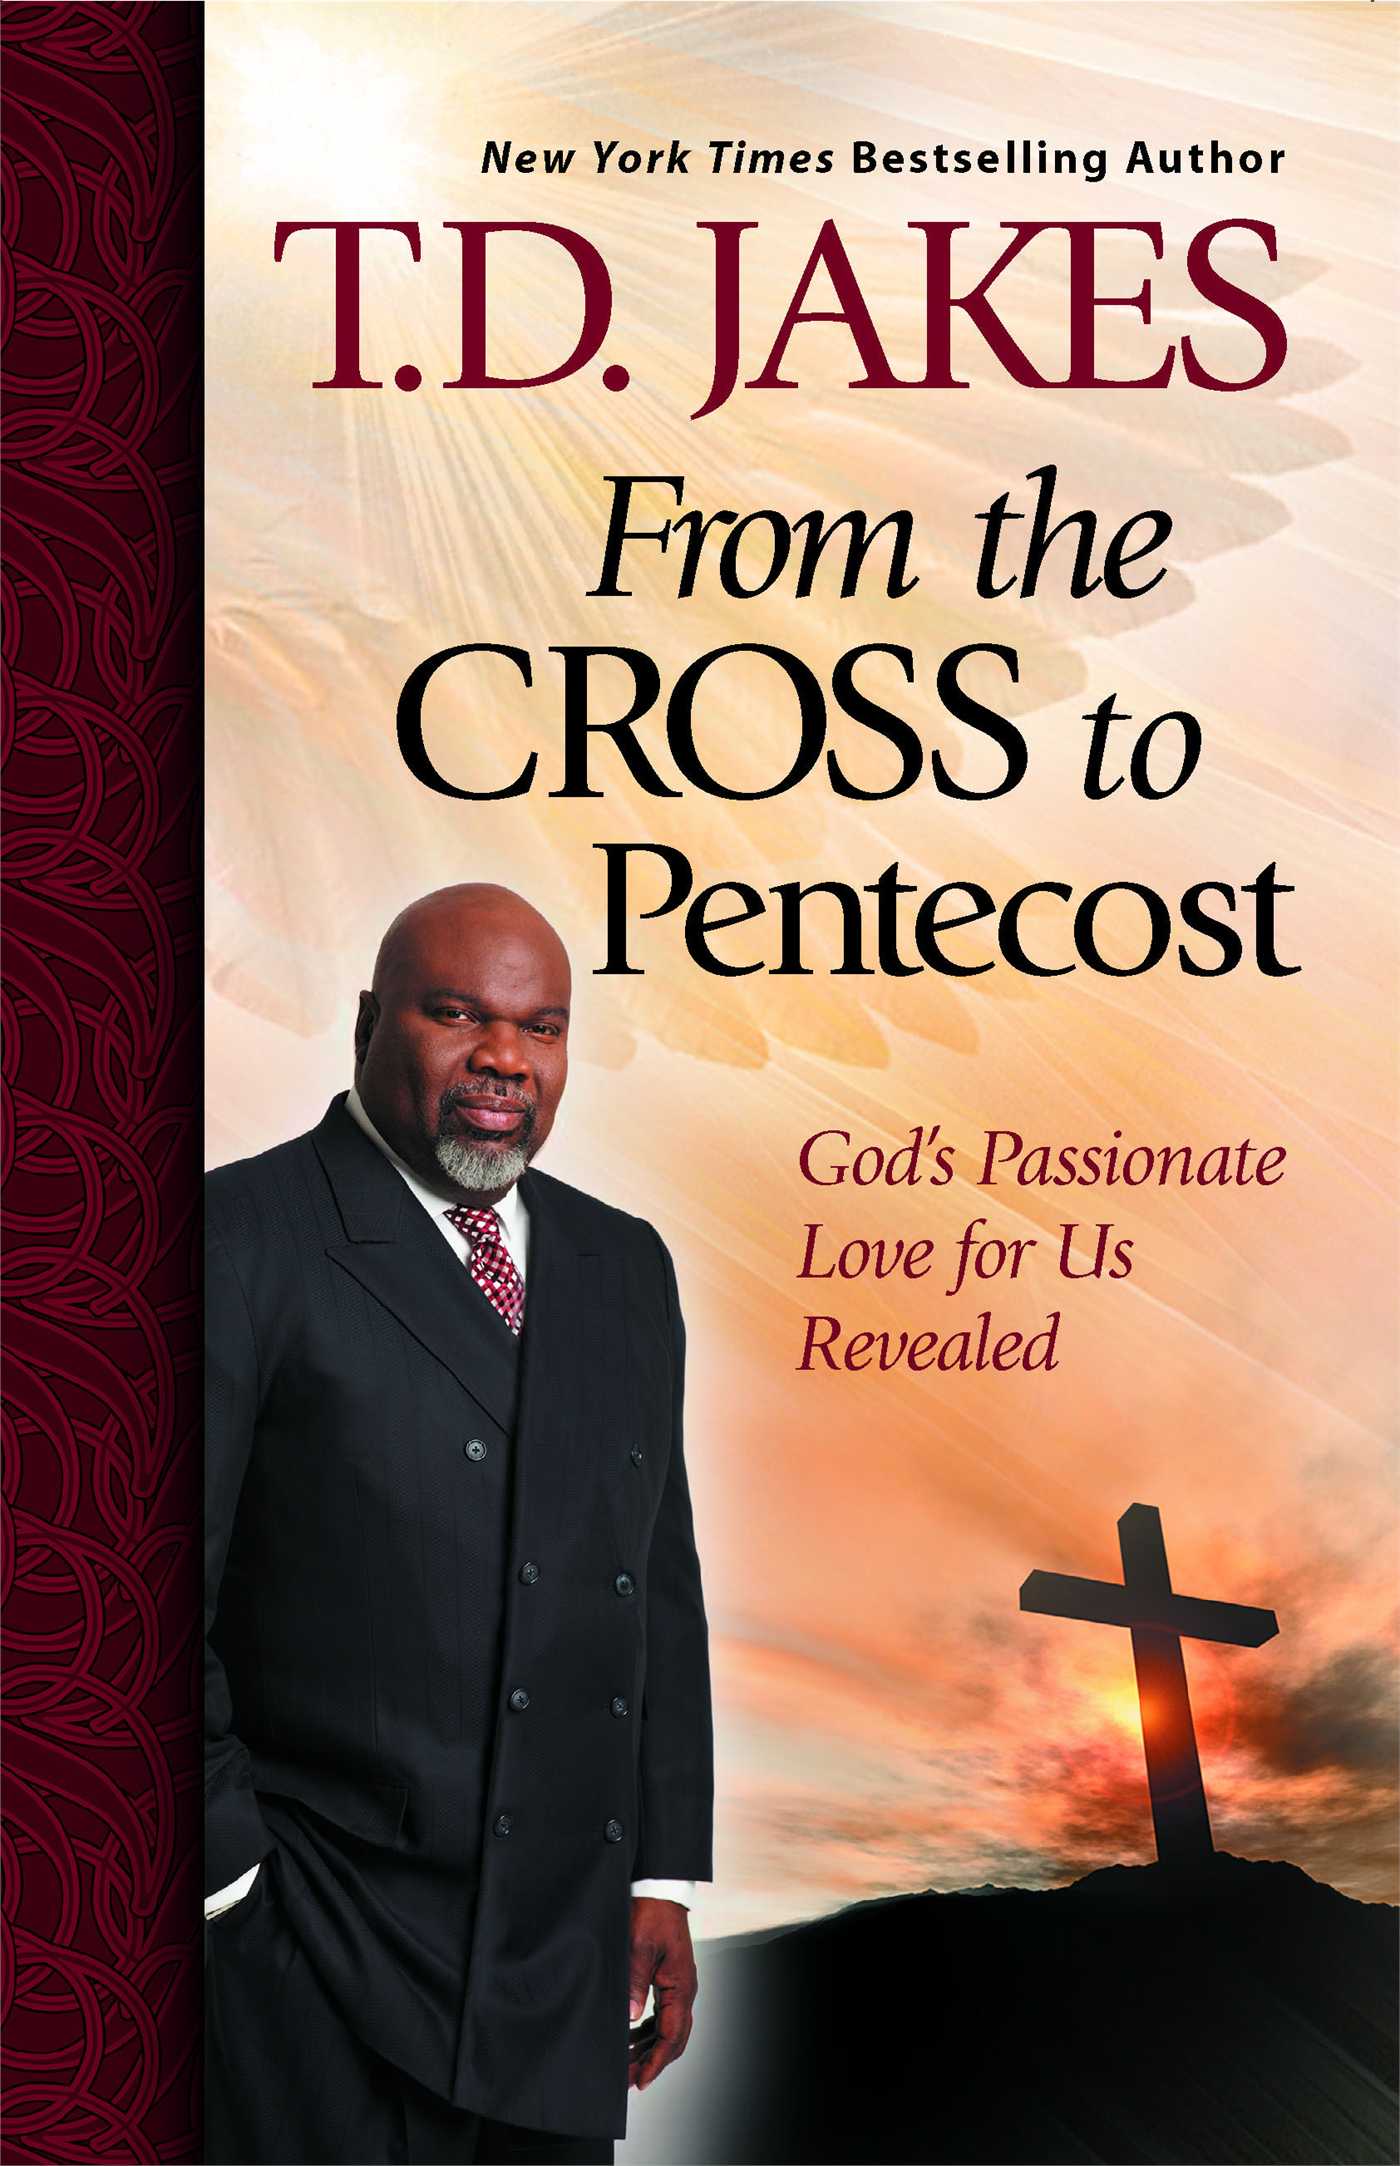 From the Cross to Pentecost : God's Passionate Love for Us Revealed (Paperback) - image 1 of 1